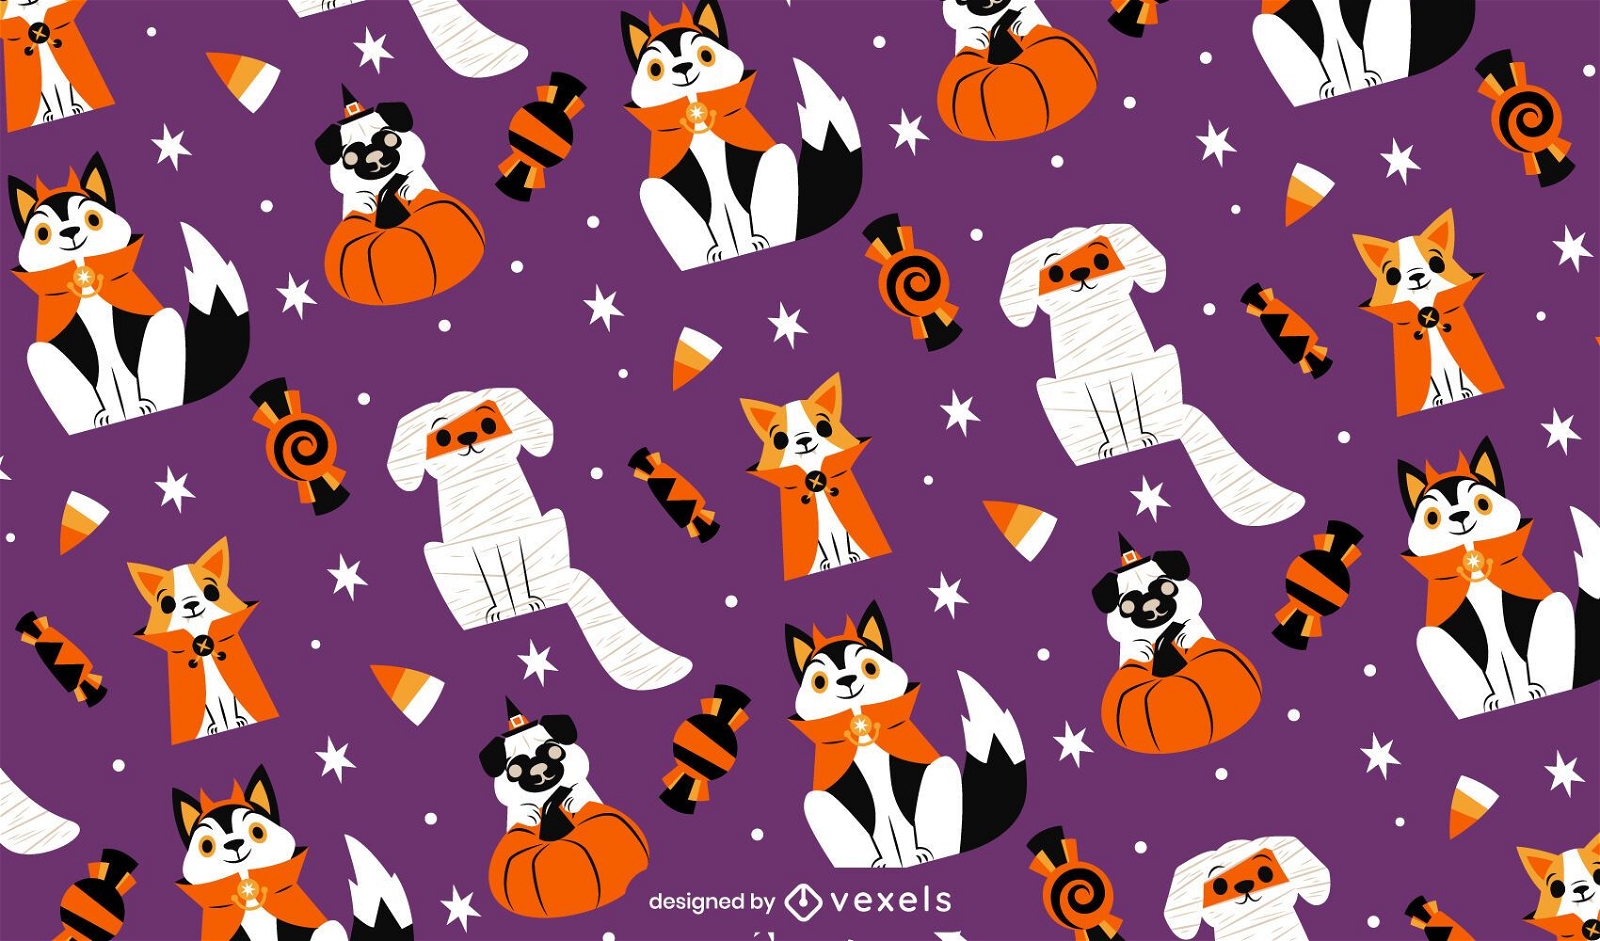 Dogs in halloween costumes pattern design